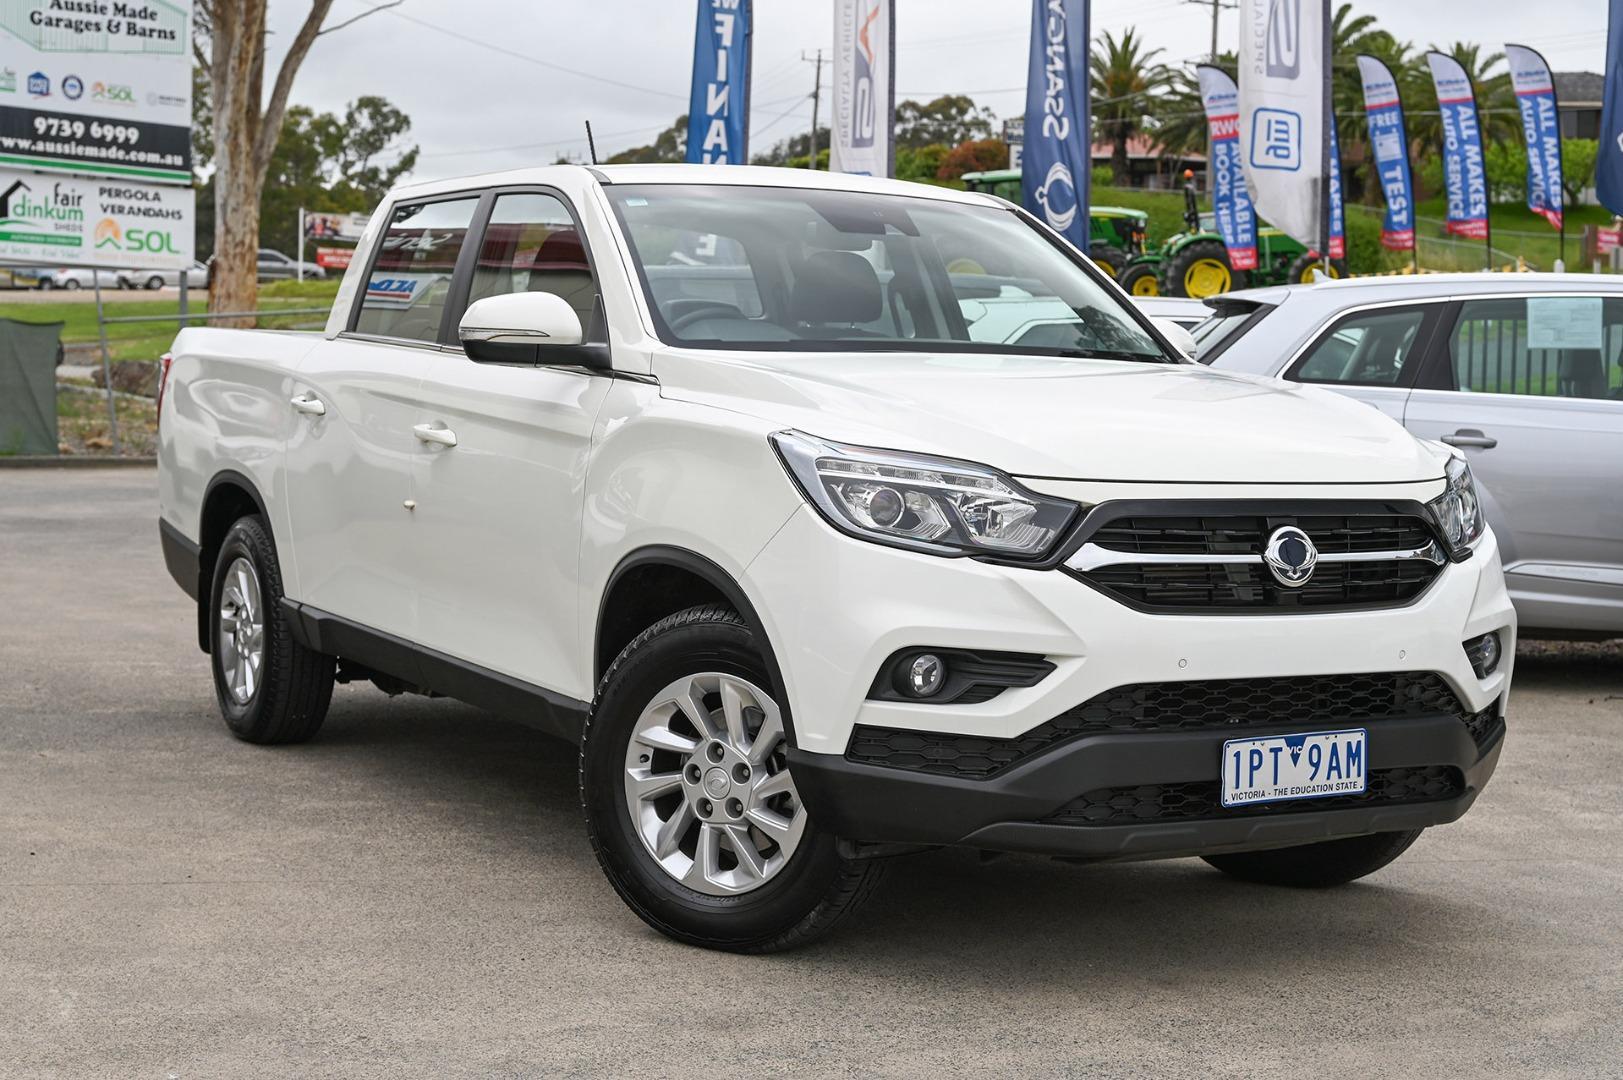 Ssangyong Musso image 1